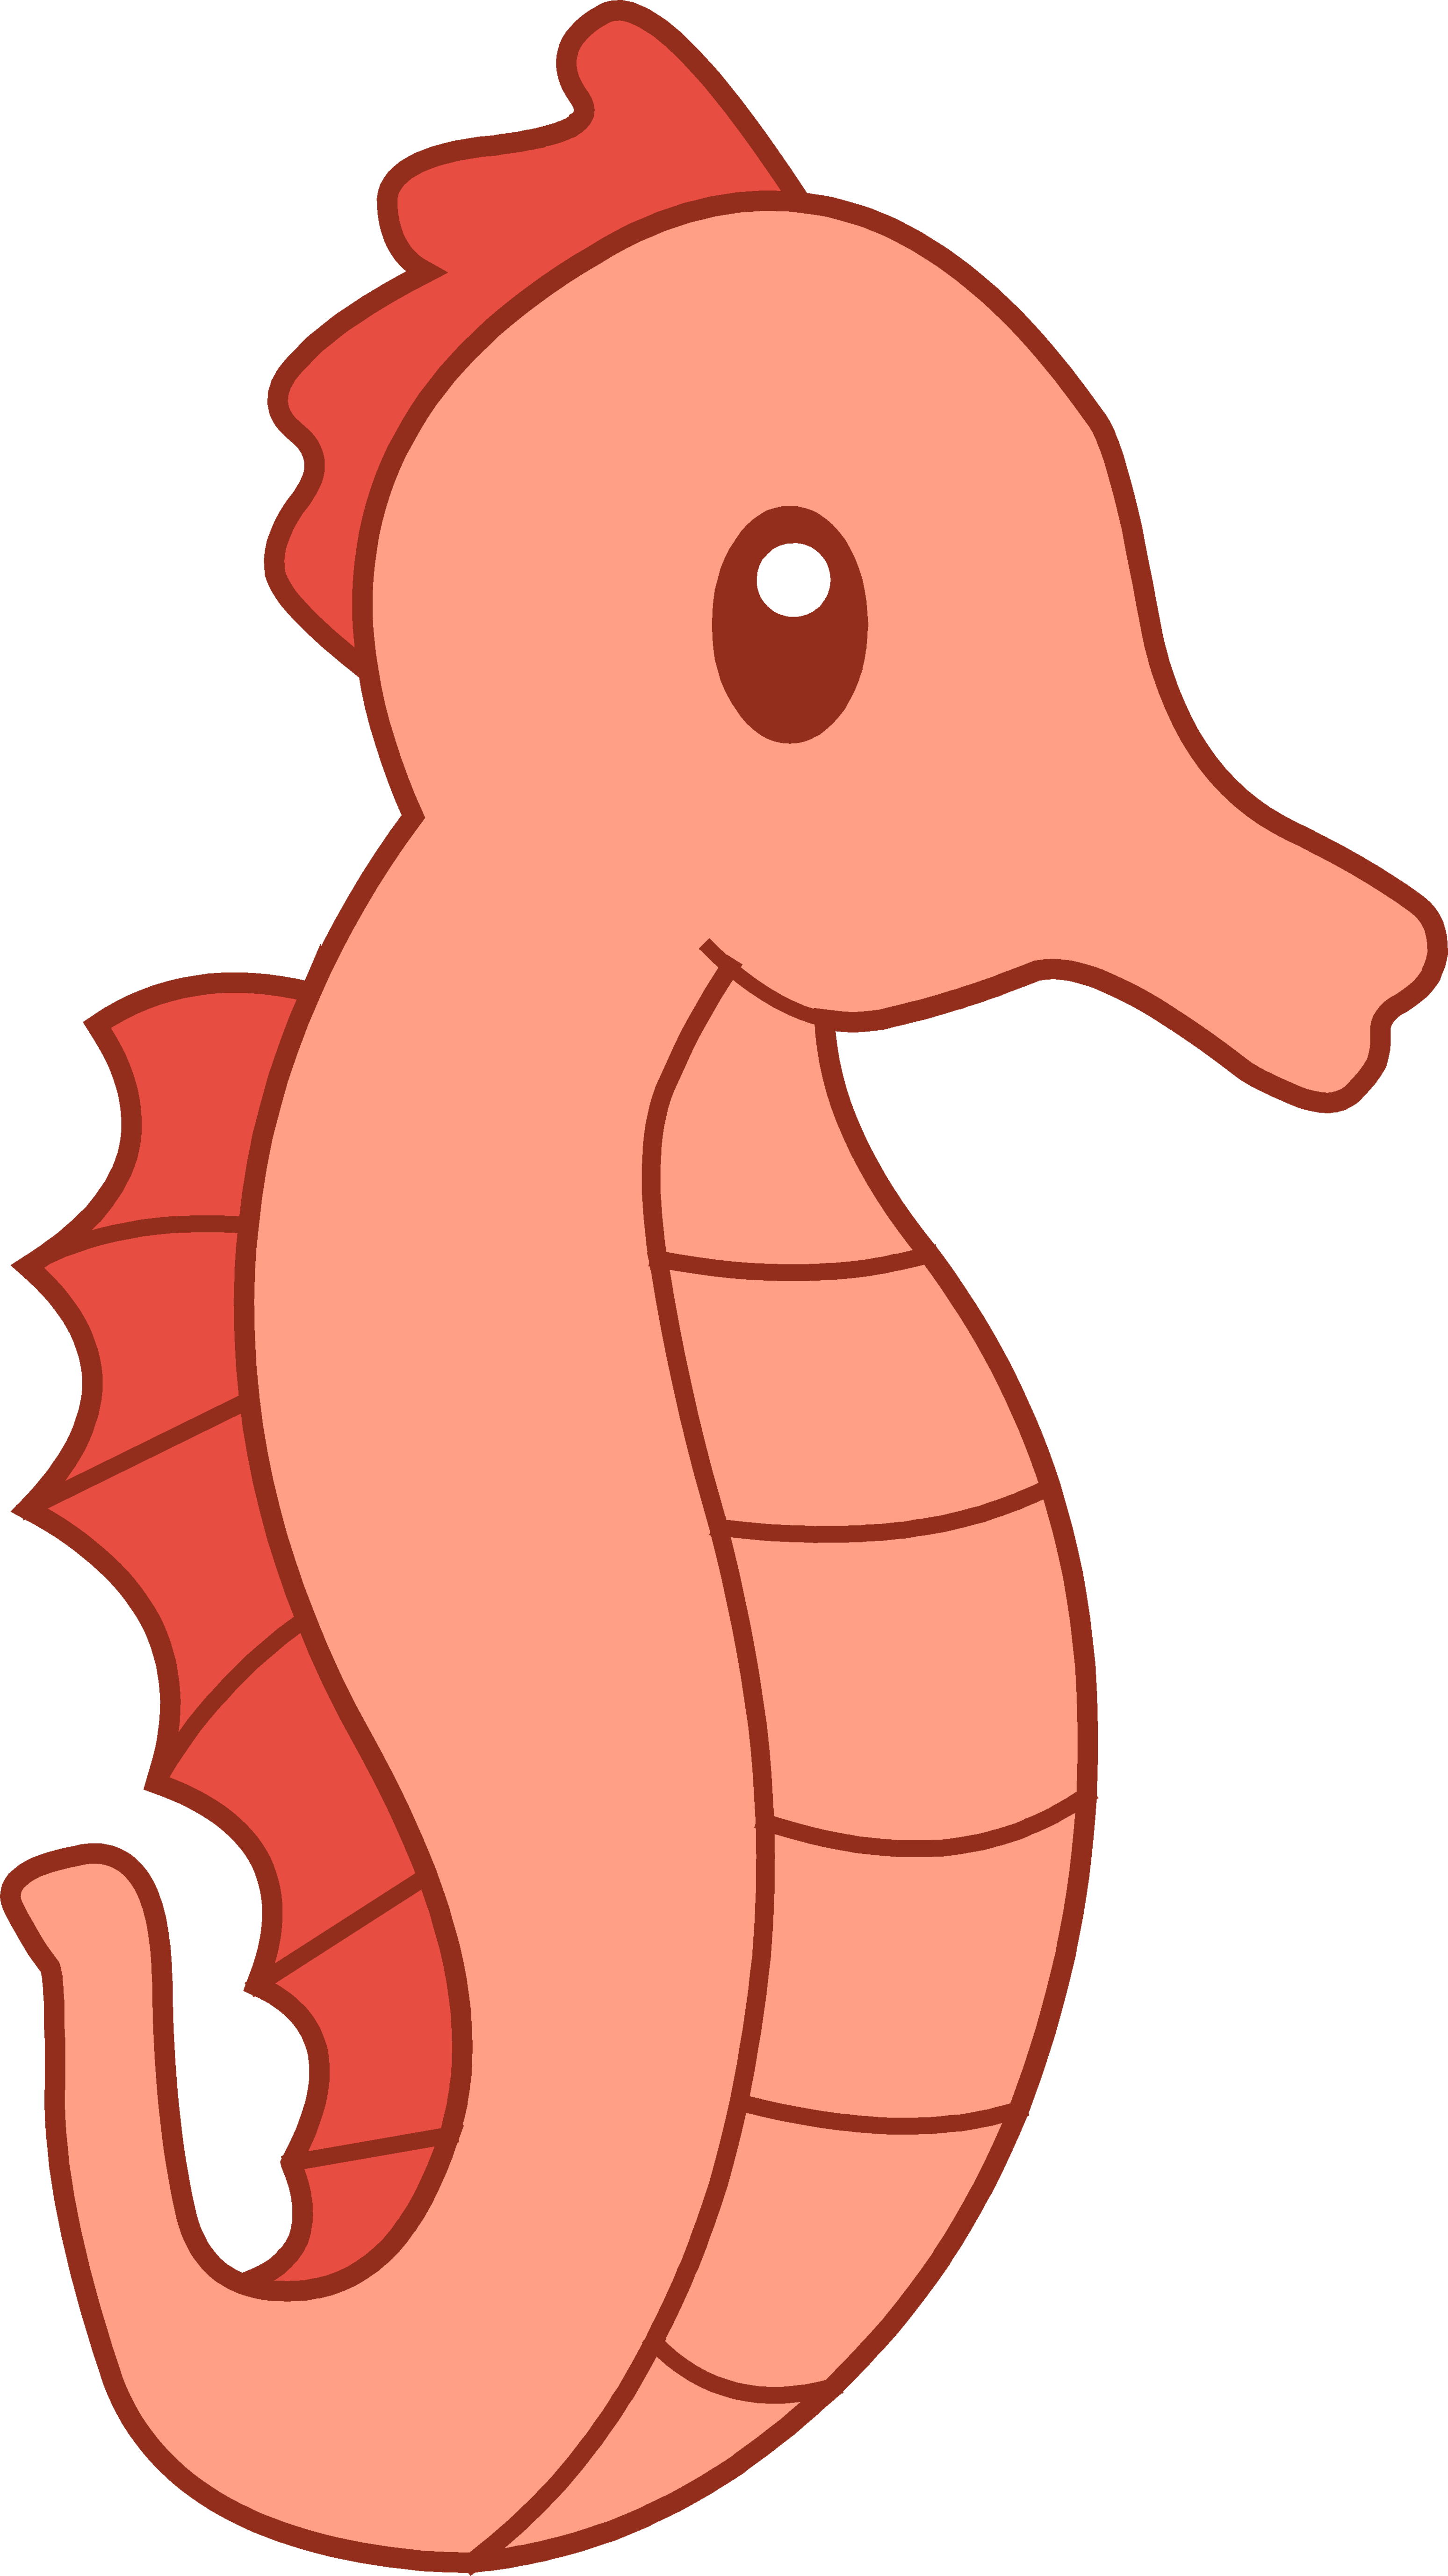 Download PNG image - Cute Seahorse PNG Image 